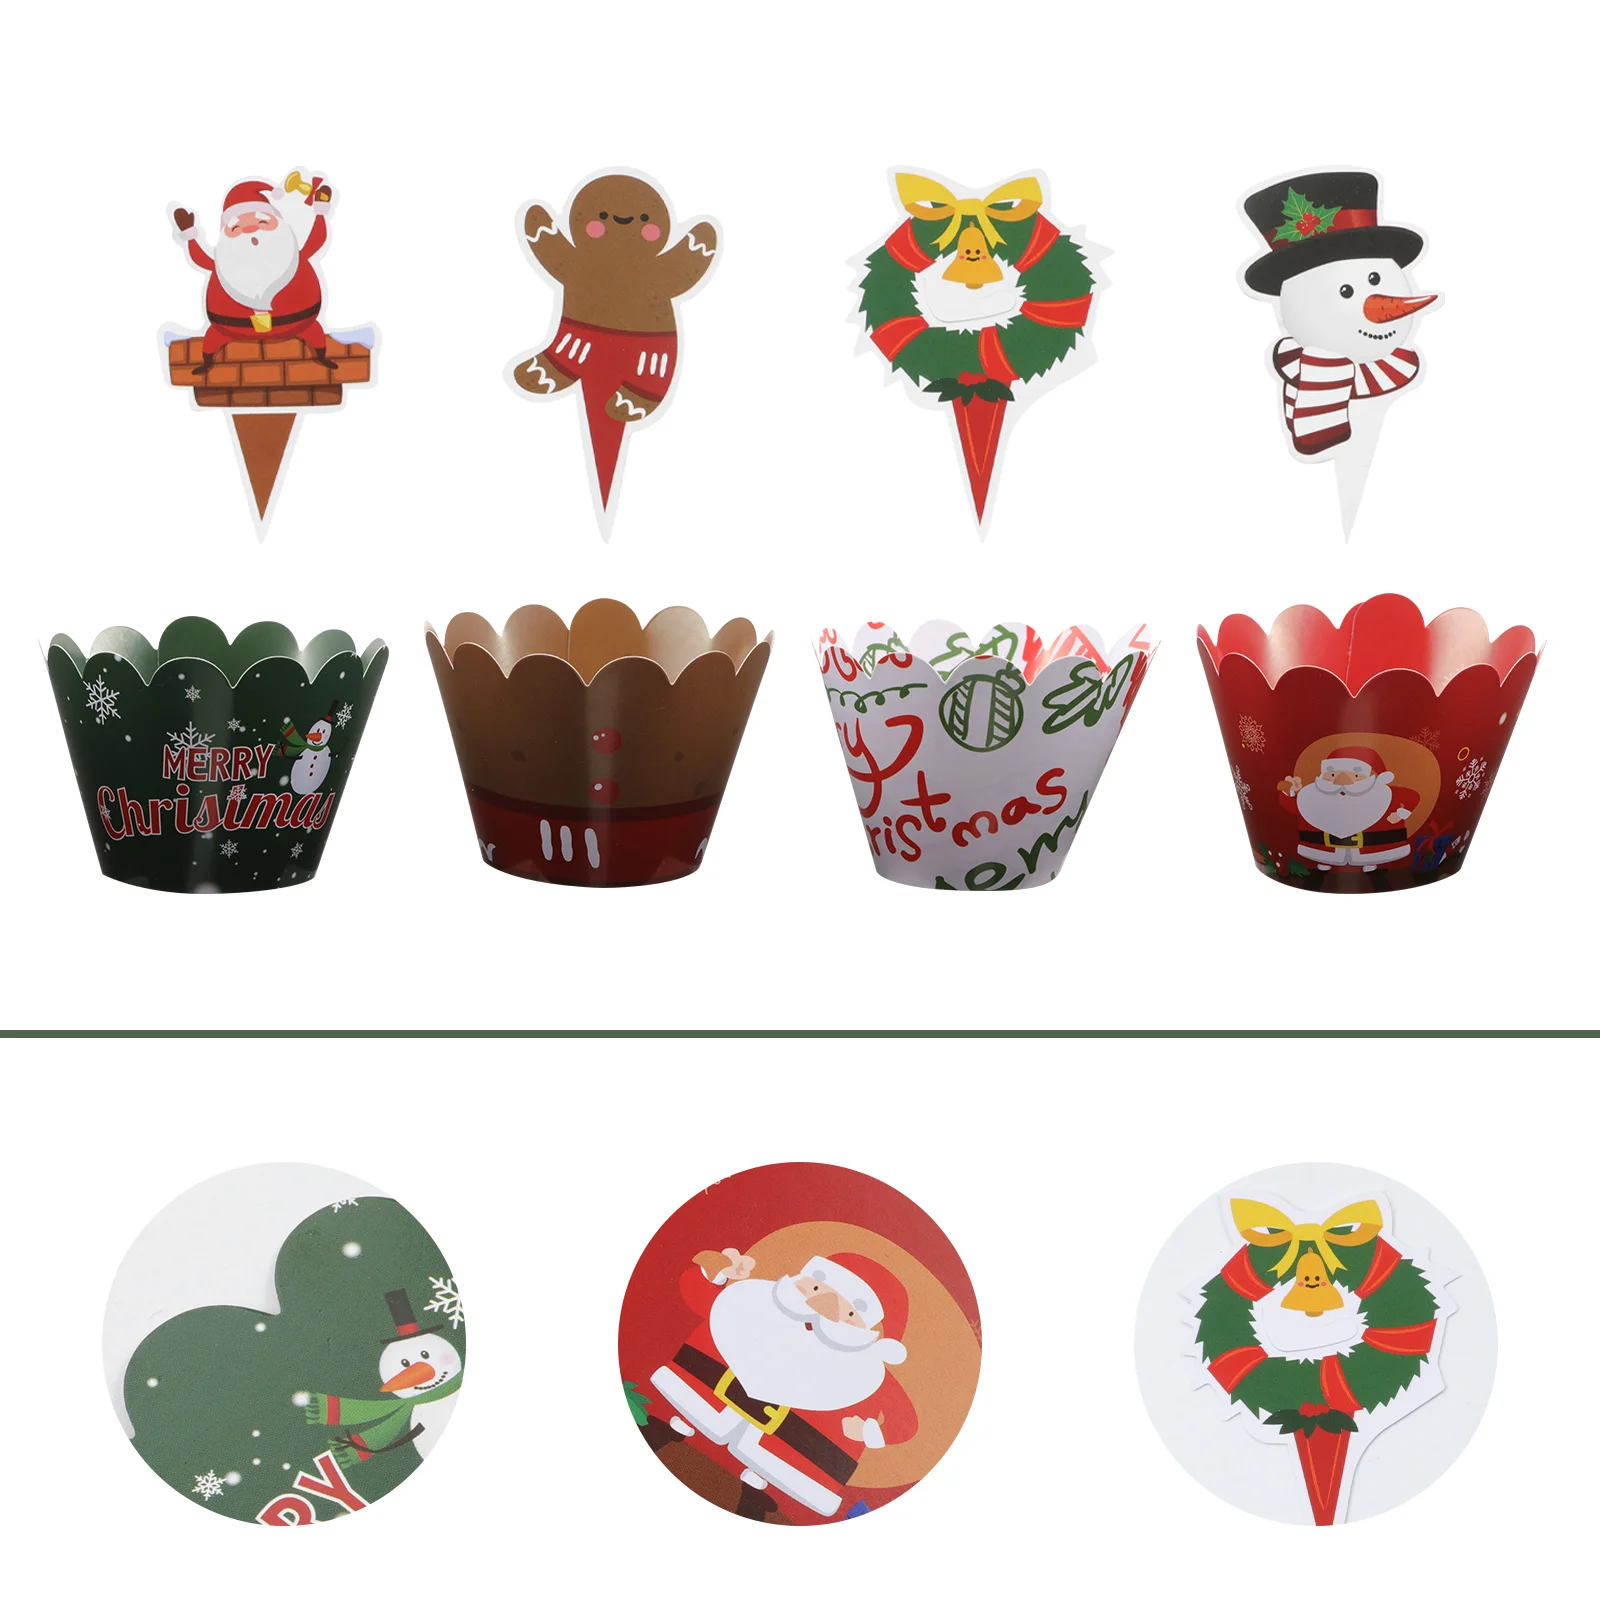 

24 Pcs Cake Border Wrappers Toppers Dessert Wraps Cupcake Holder Cups Christmas Wrapping Paper Muffin Baking Liners